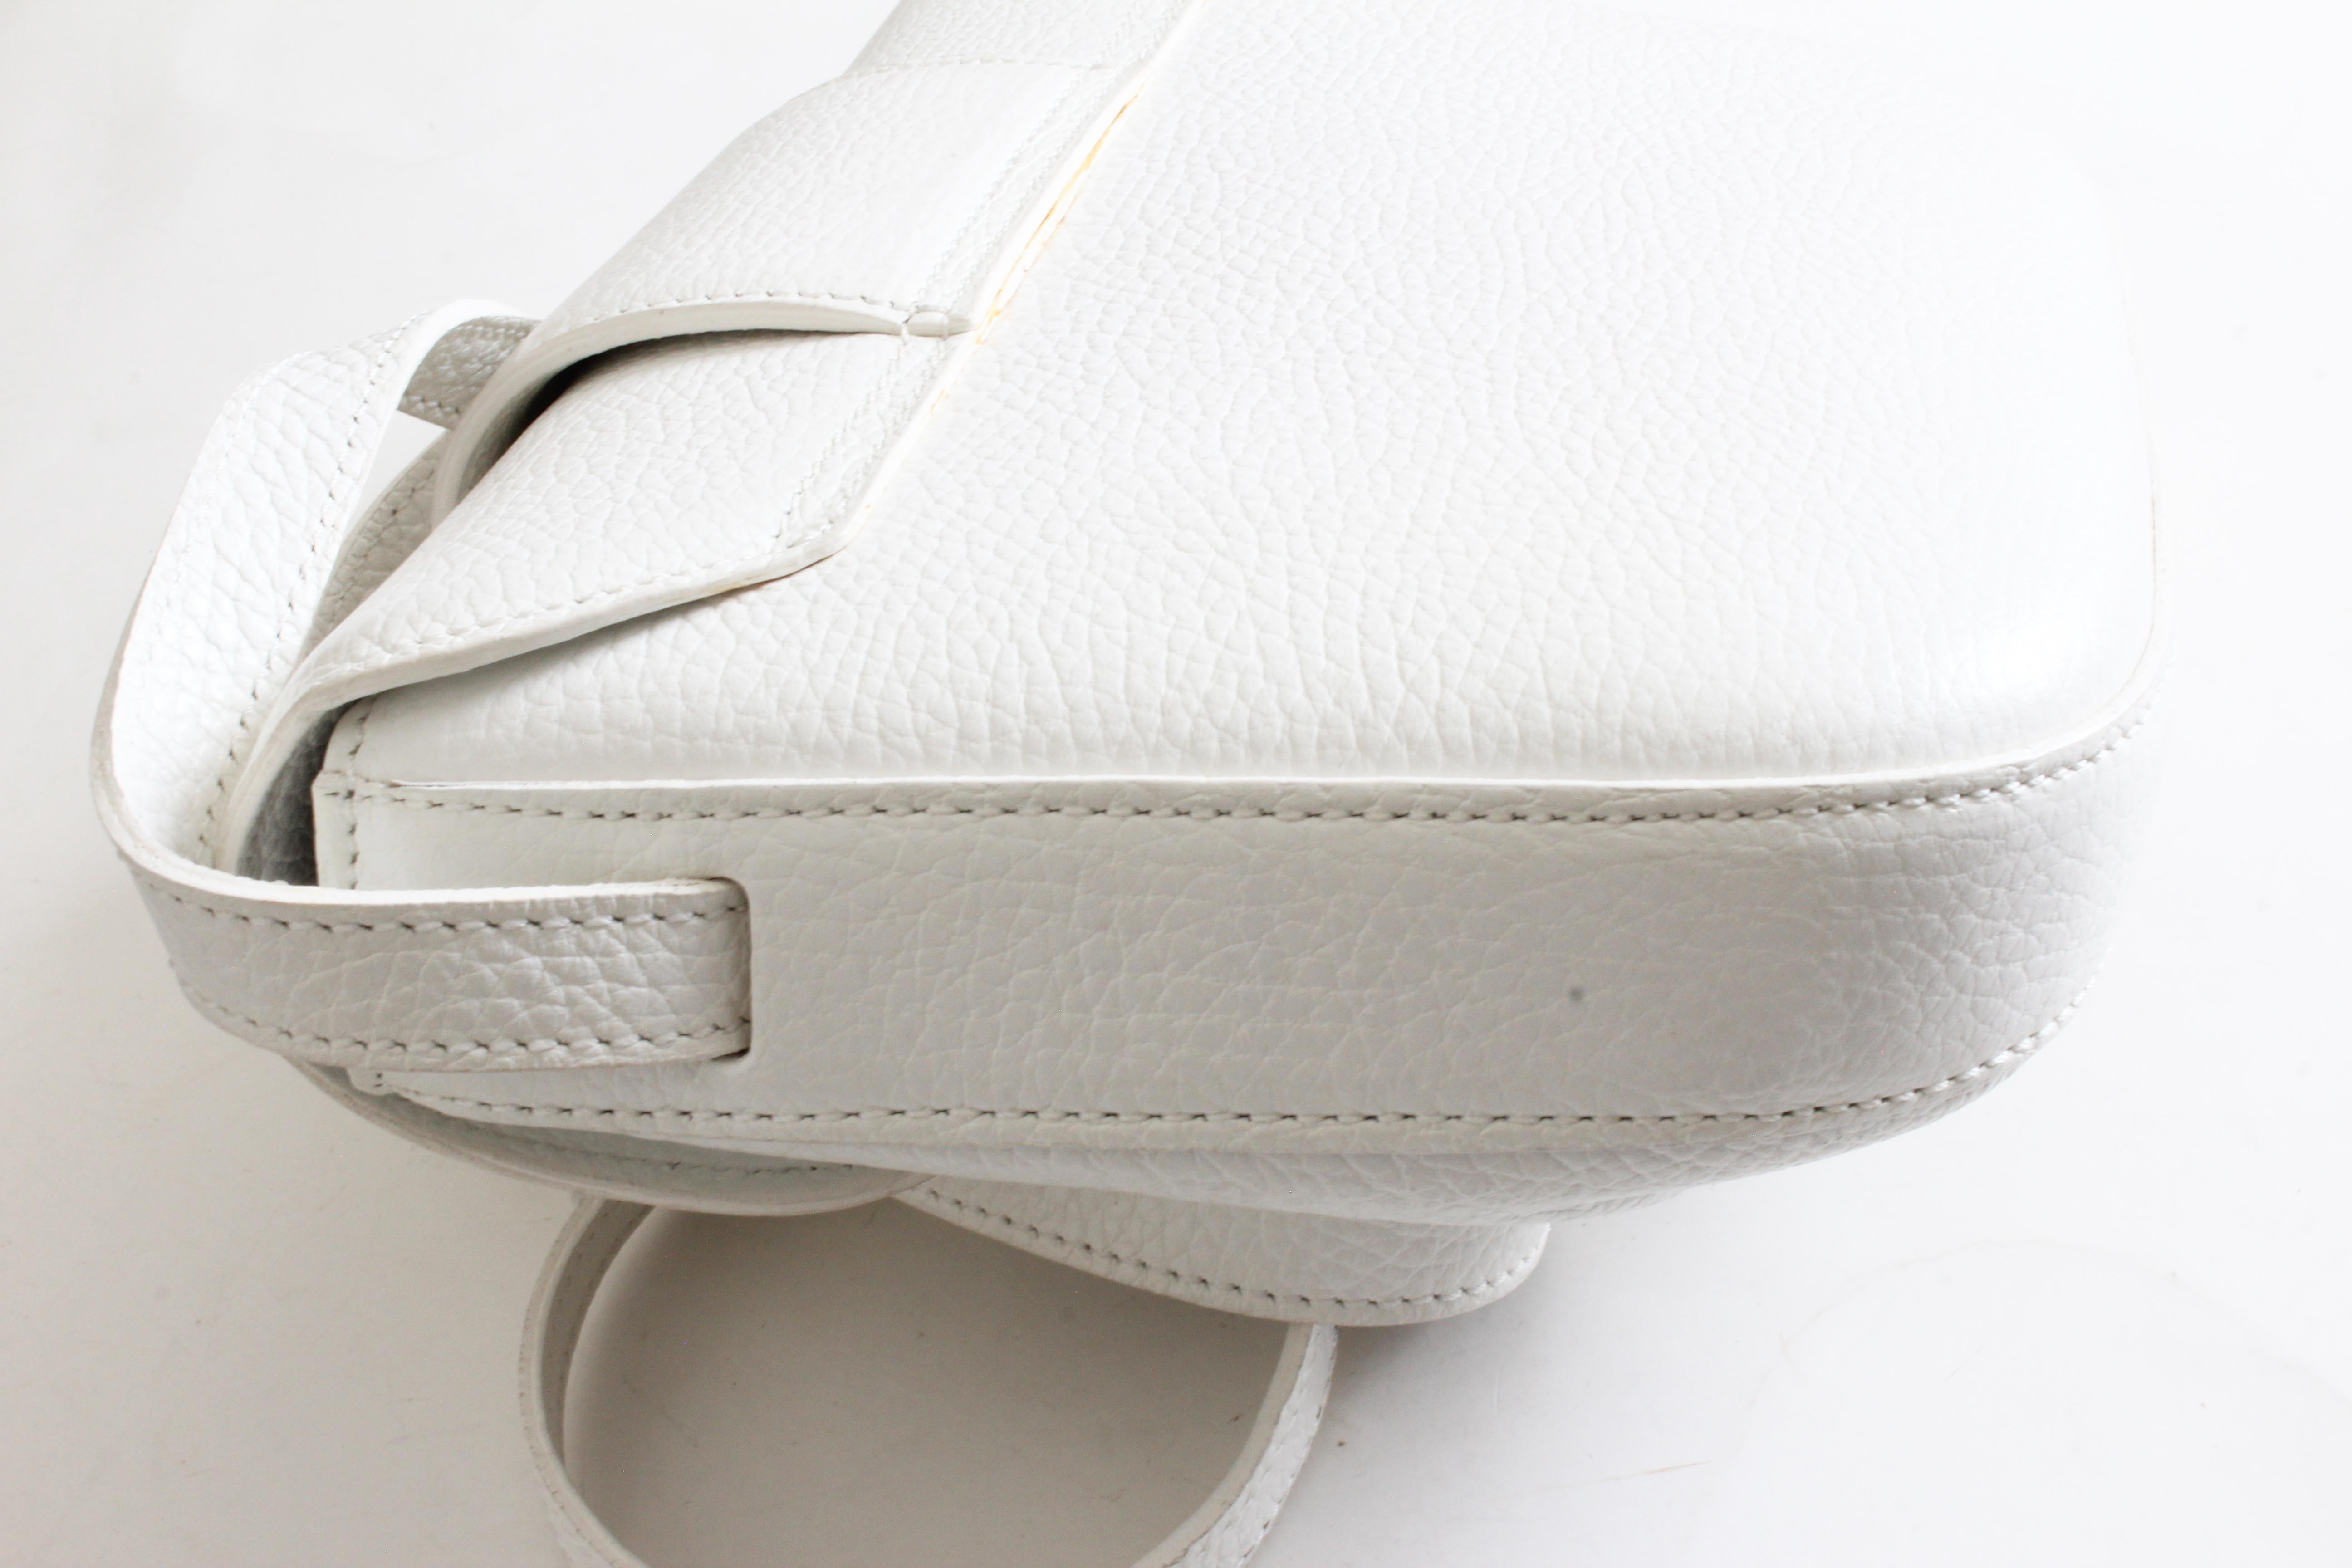 Bally Crossbody Bag White Pebbled Leather Top Flap Shoulder Bag Italy Vintage For Sale 4